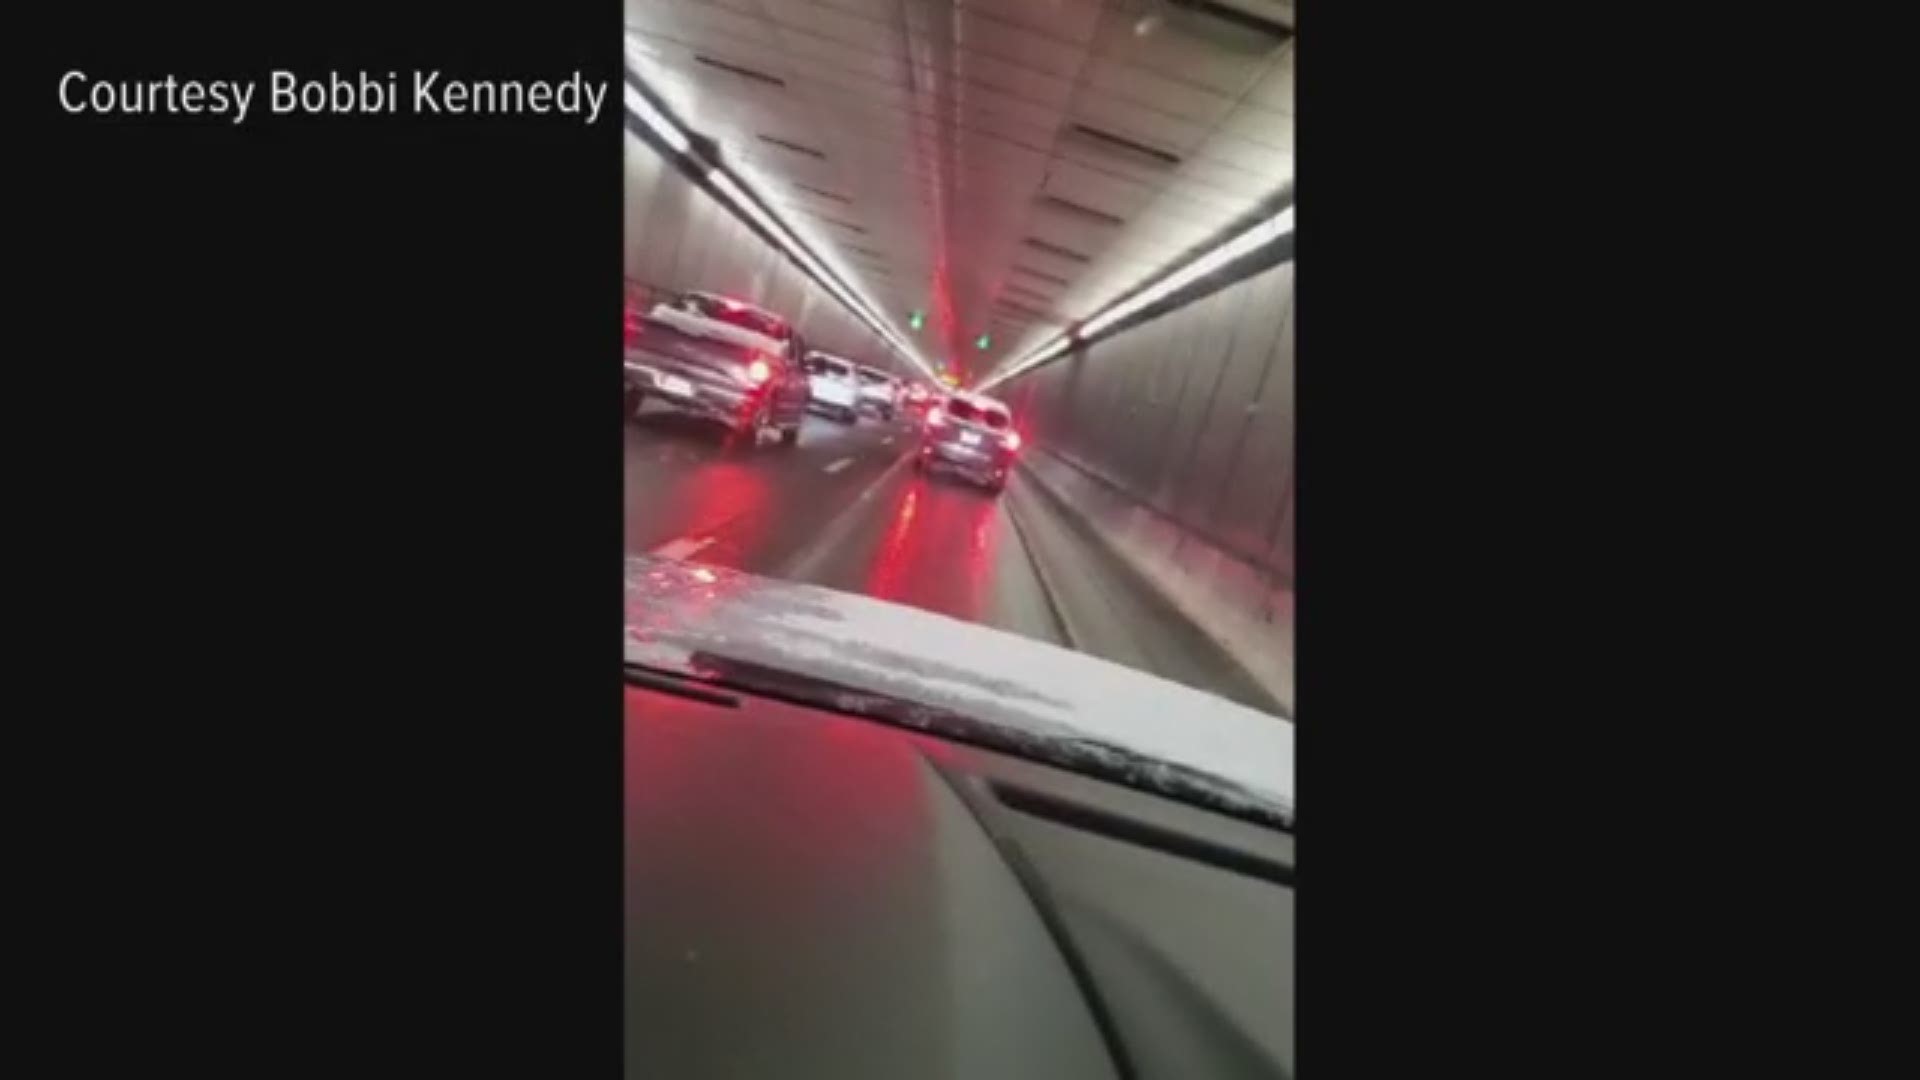 Viewer Bobbi Kennedy says I-70 ski traffic doesn't have to suck. Here's proof of the "solidarity" in the tunnel.